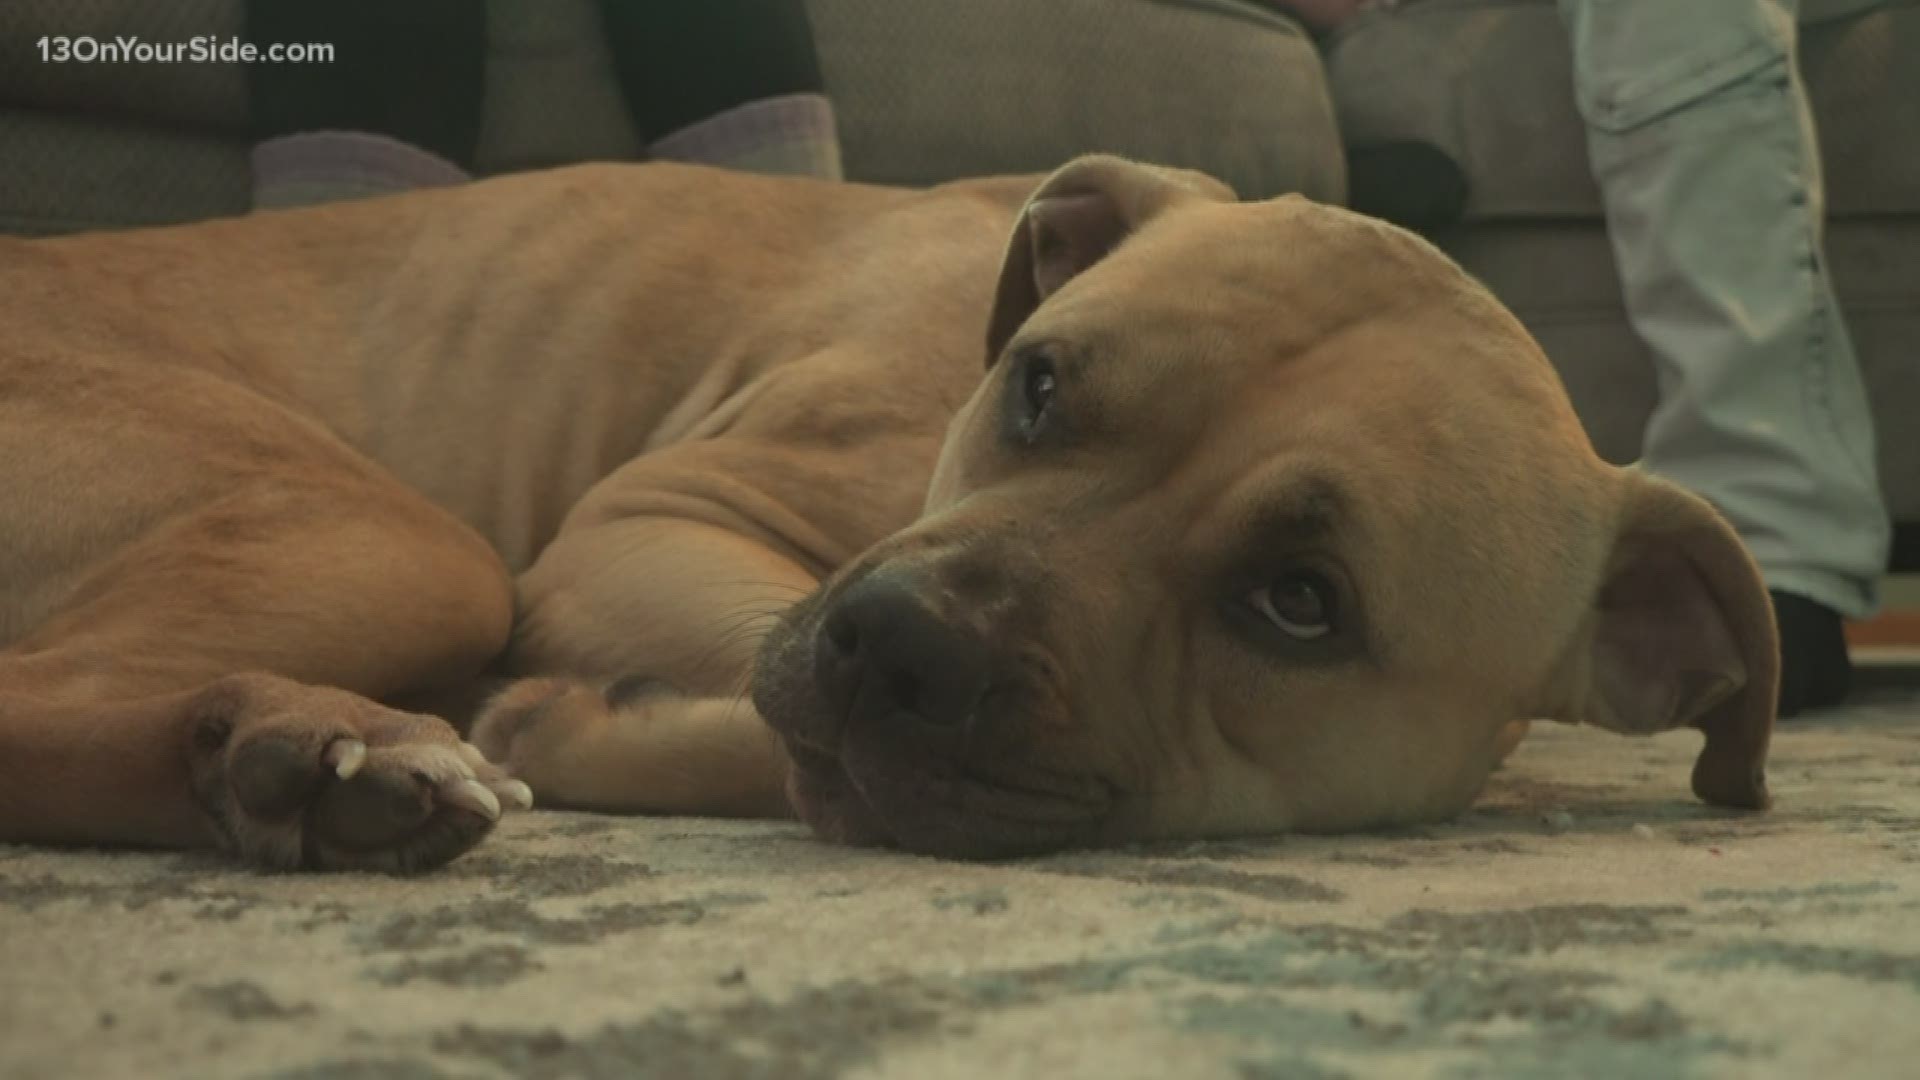 After nearly a month-long search, a Muskegon family was reunited with their beloved dog.